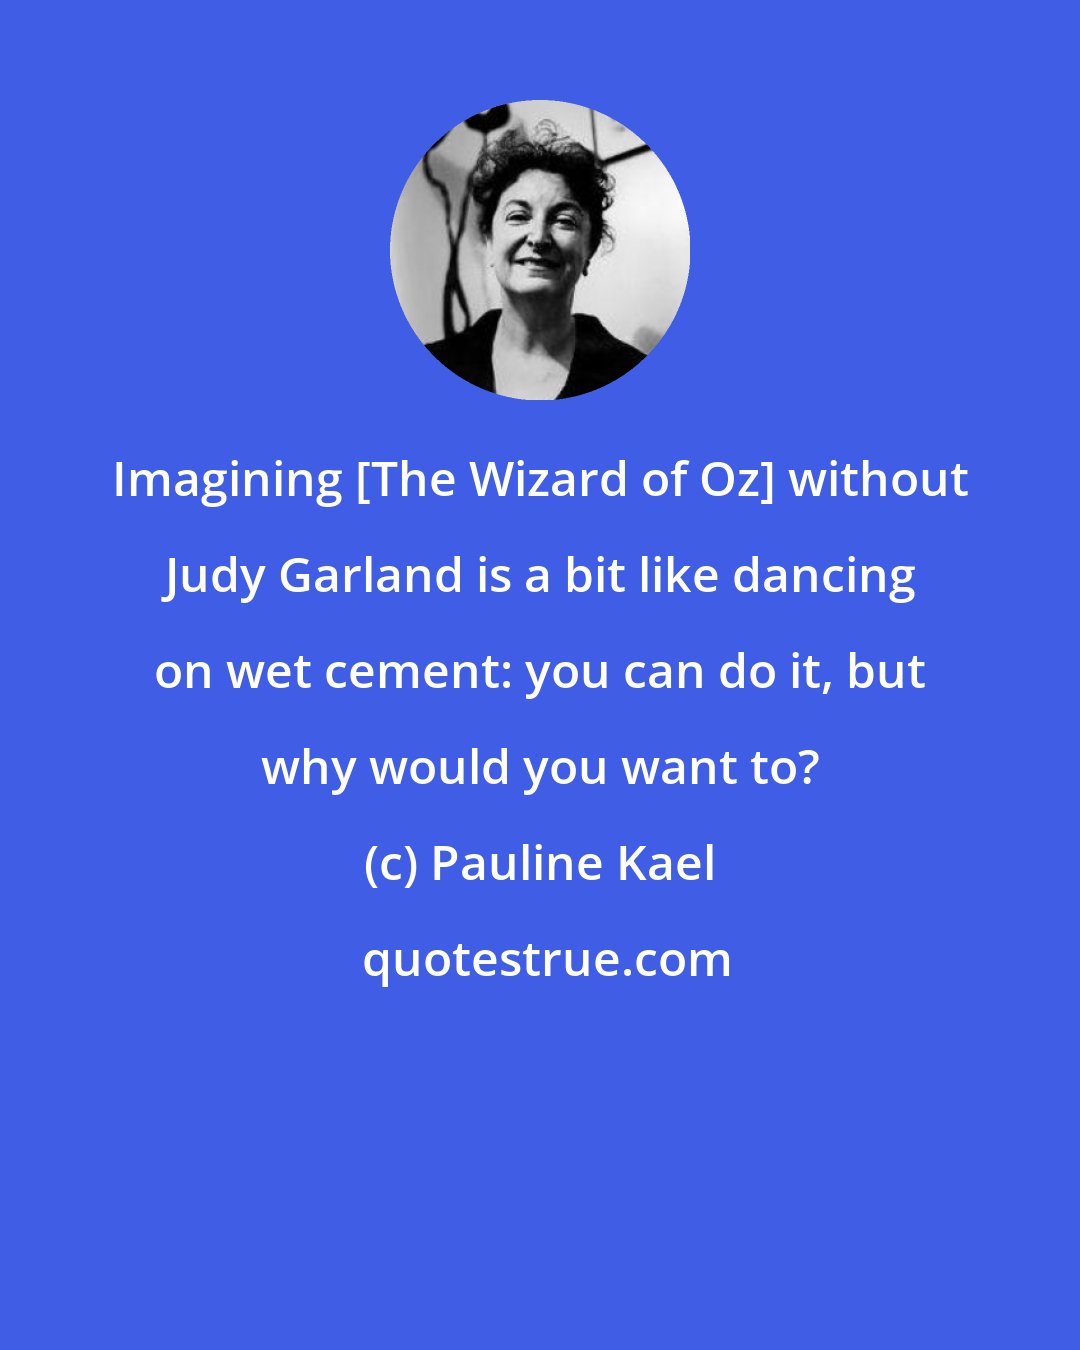 Pauline Kael: Imagining [The Wizard of Oz] without Judy Garland is a bit like dancing on wet cement: you can do it, but why would you want to?